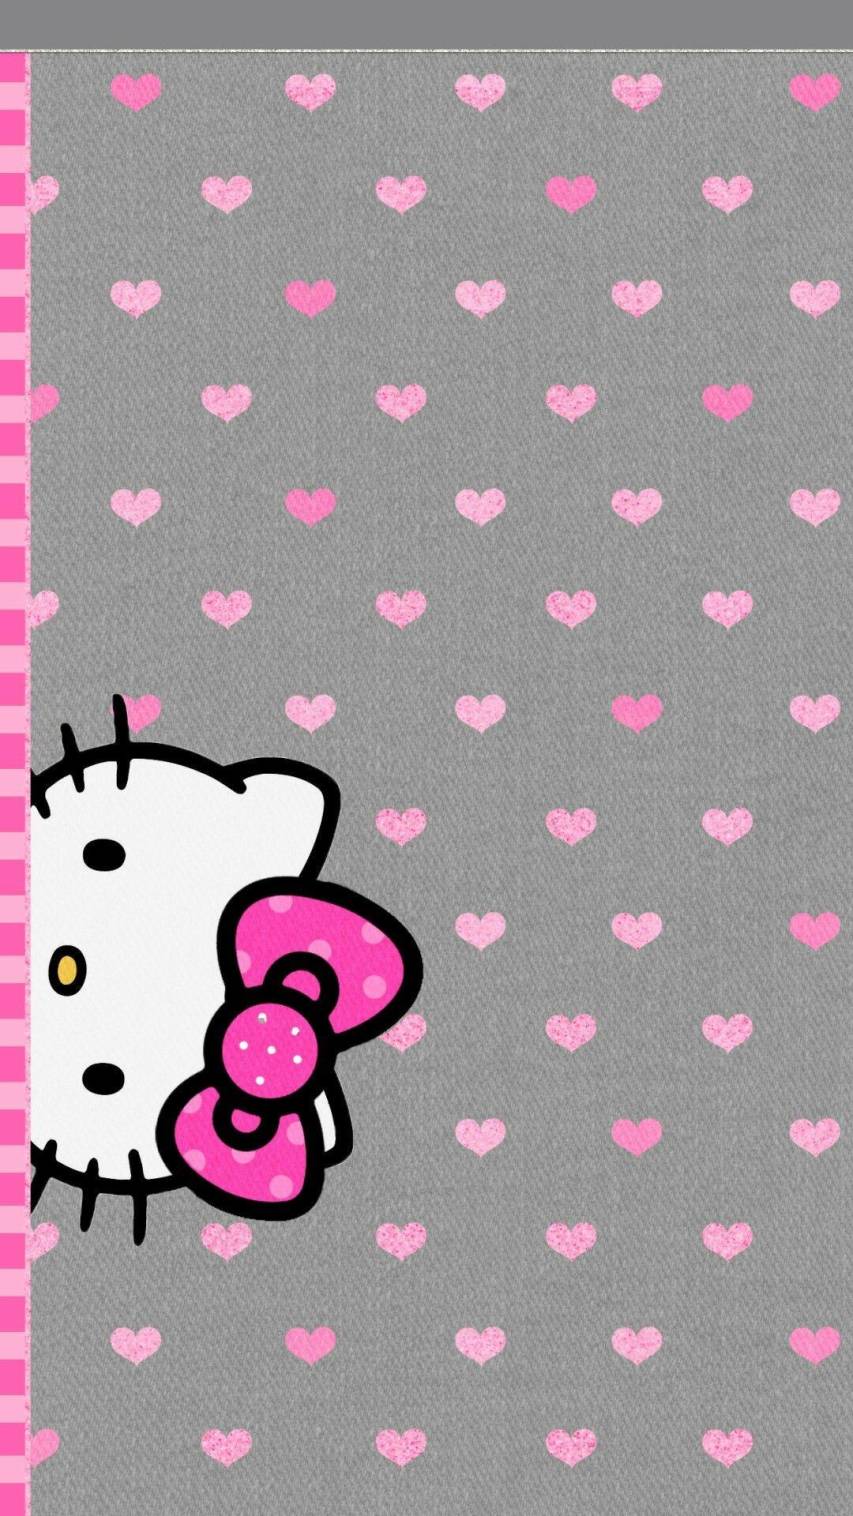 Cool and colorful Hello Kitty wallpapers to fit your iPhone iPhone iPhone  Galaxy and Galaxy Note